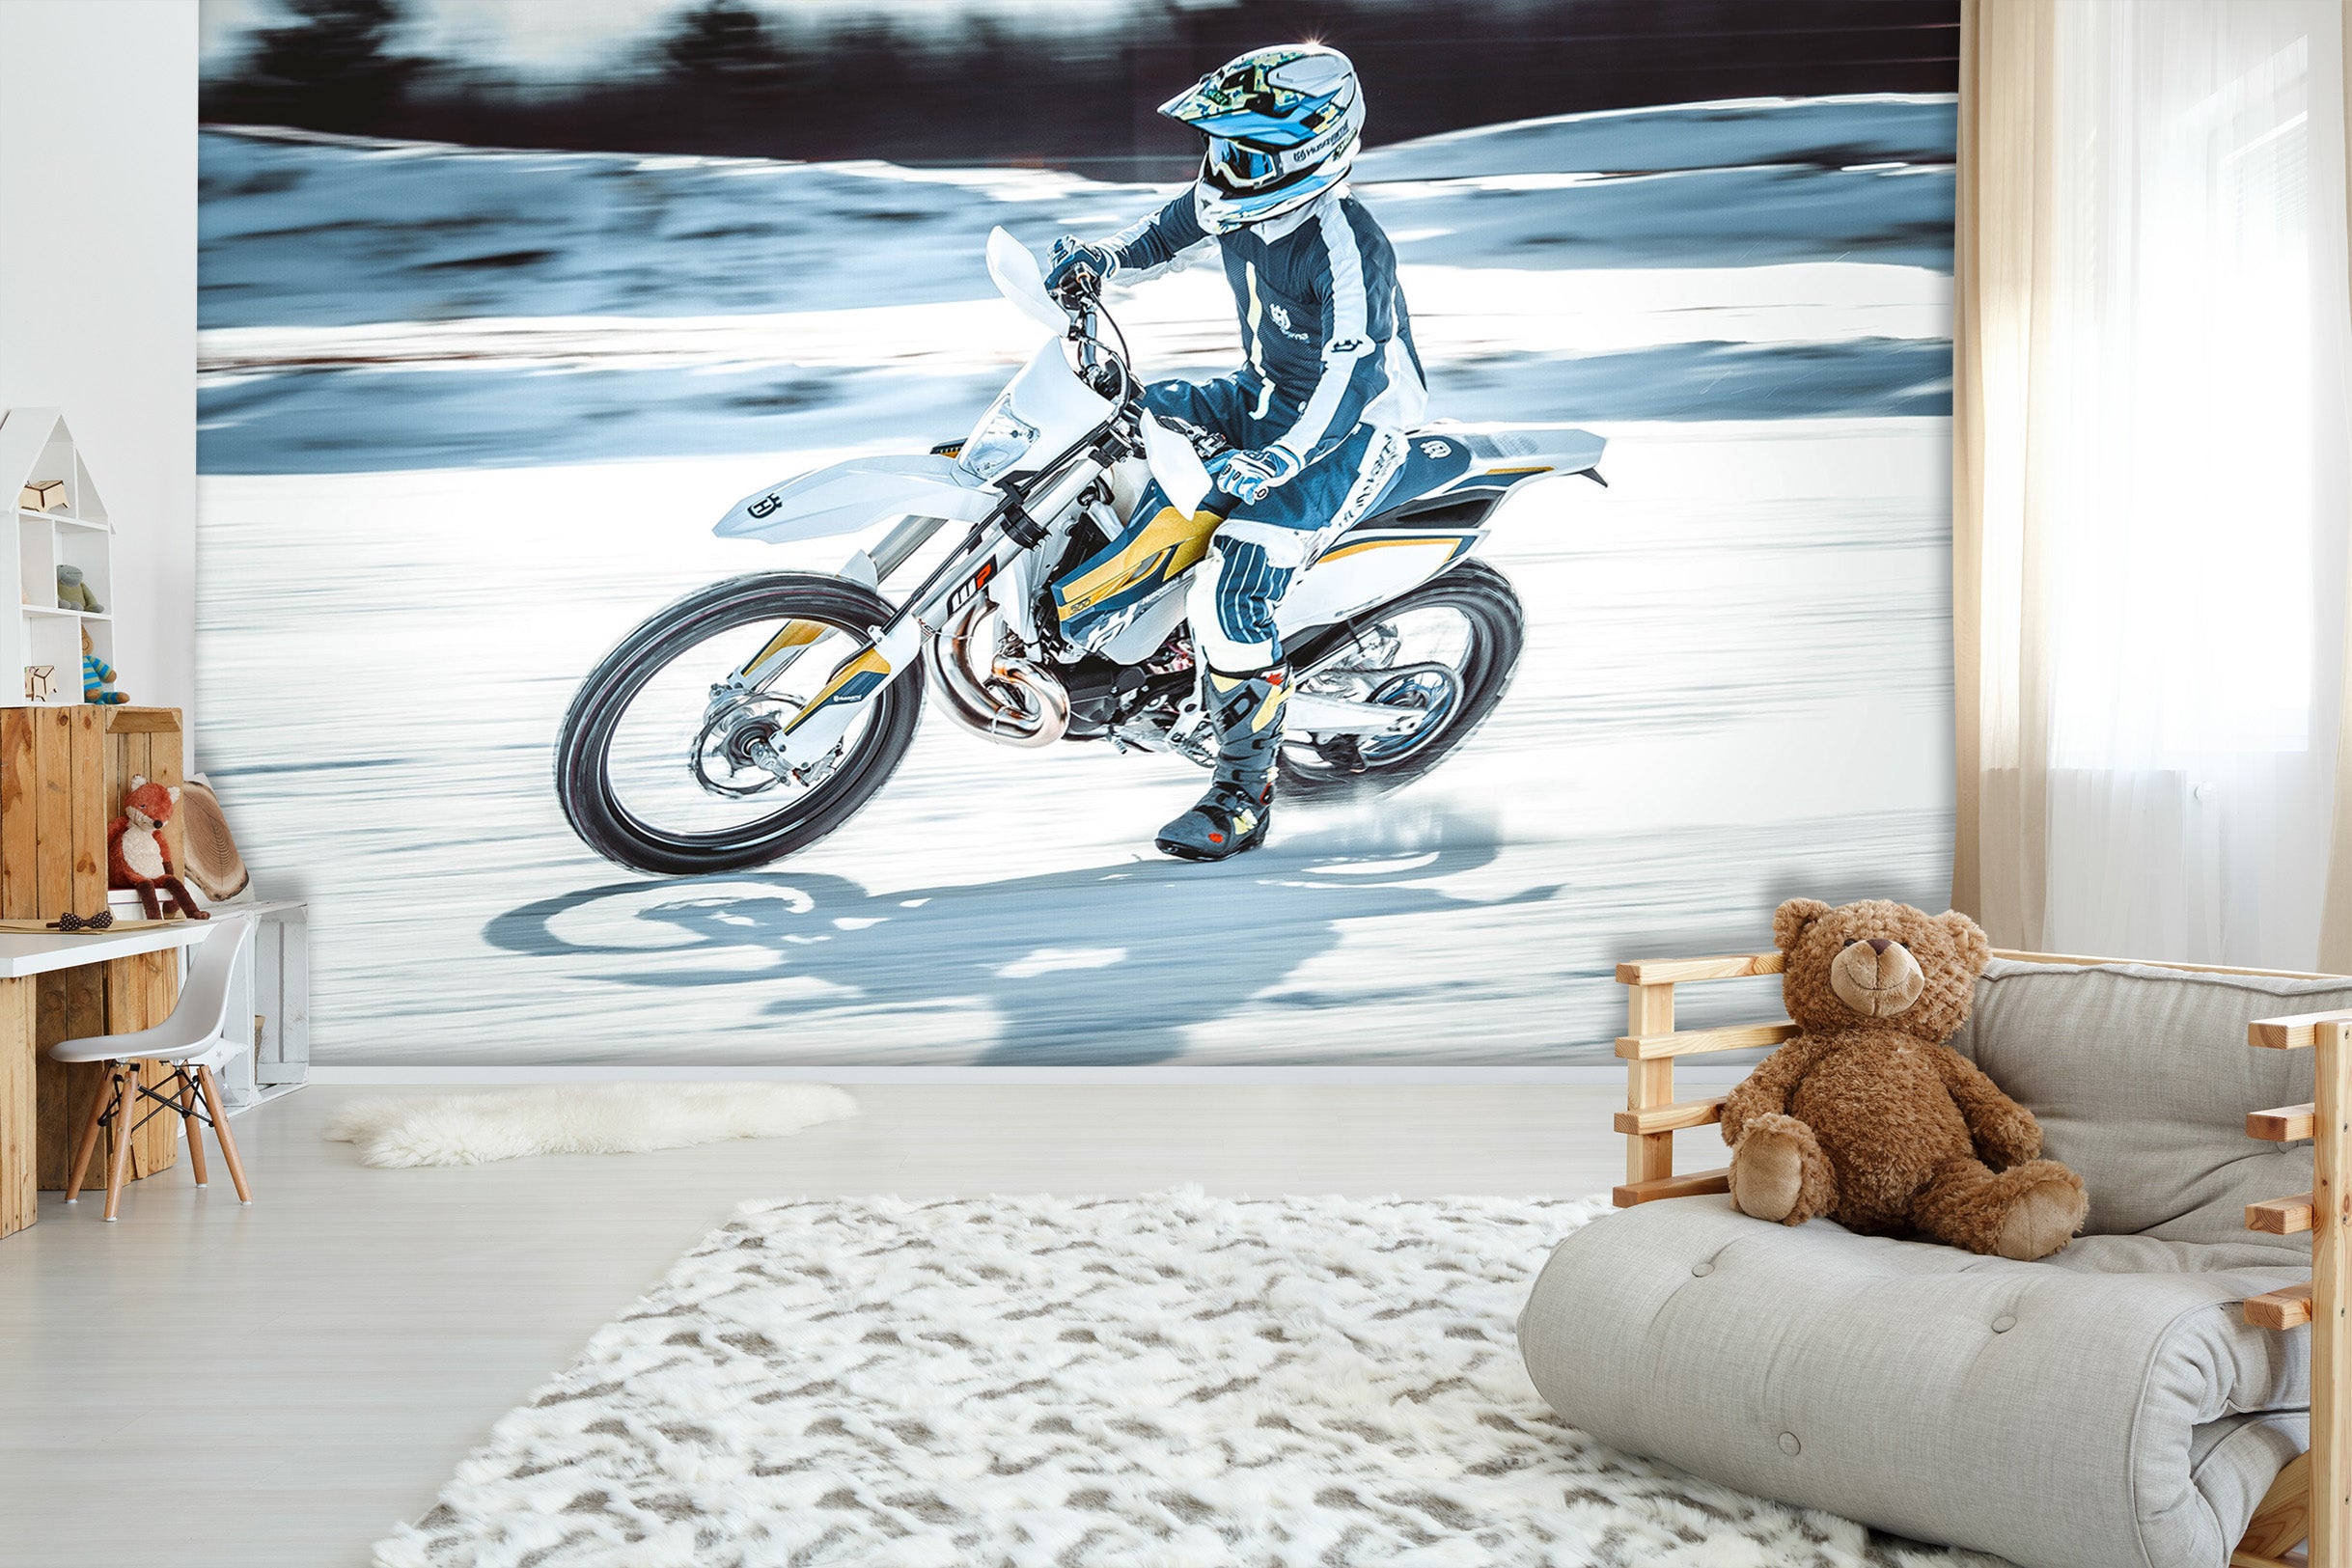 3D Snow Motorcycle 056 Vehicle Wall Murals